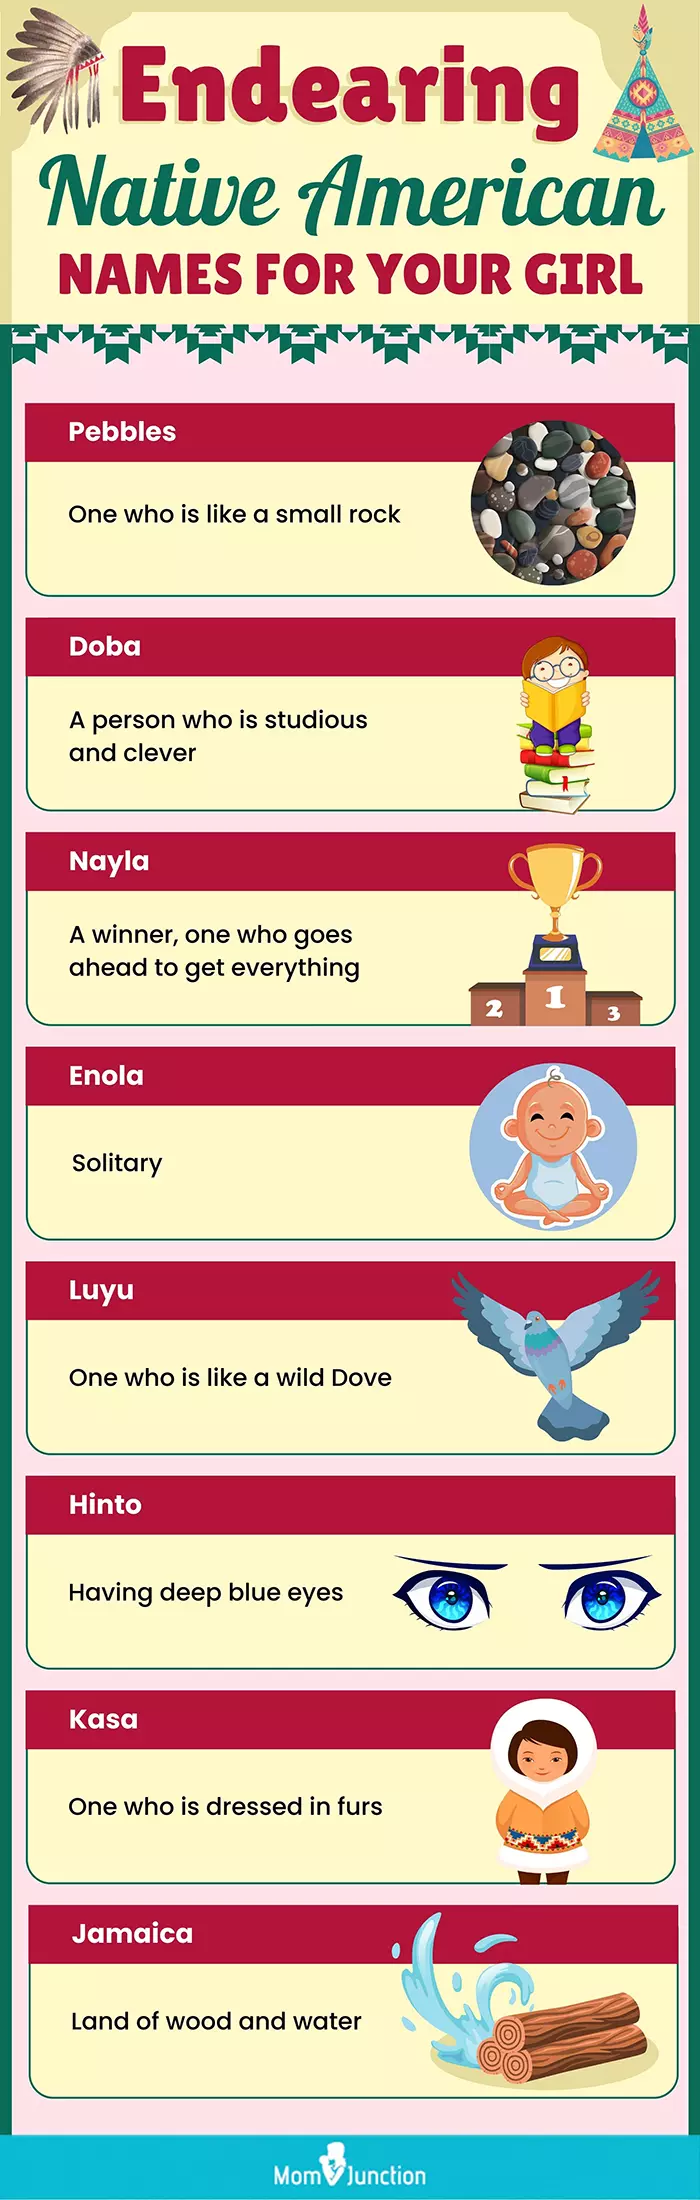 endearing native american names for your girl (infographic)